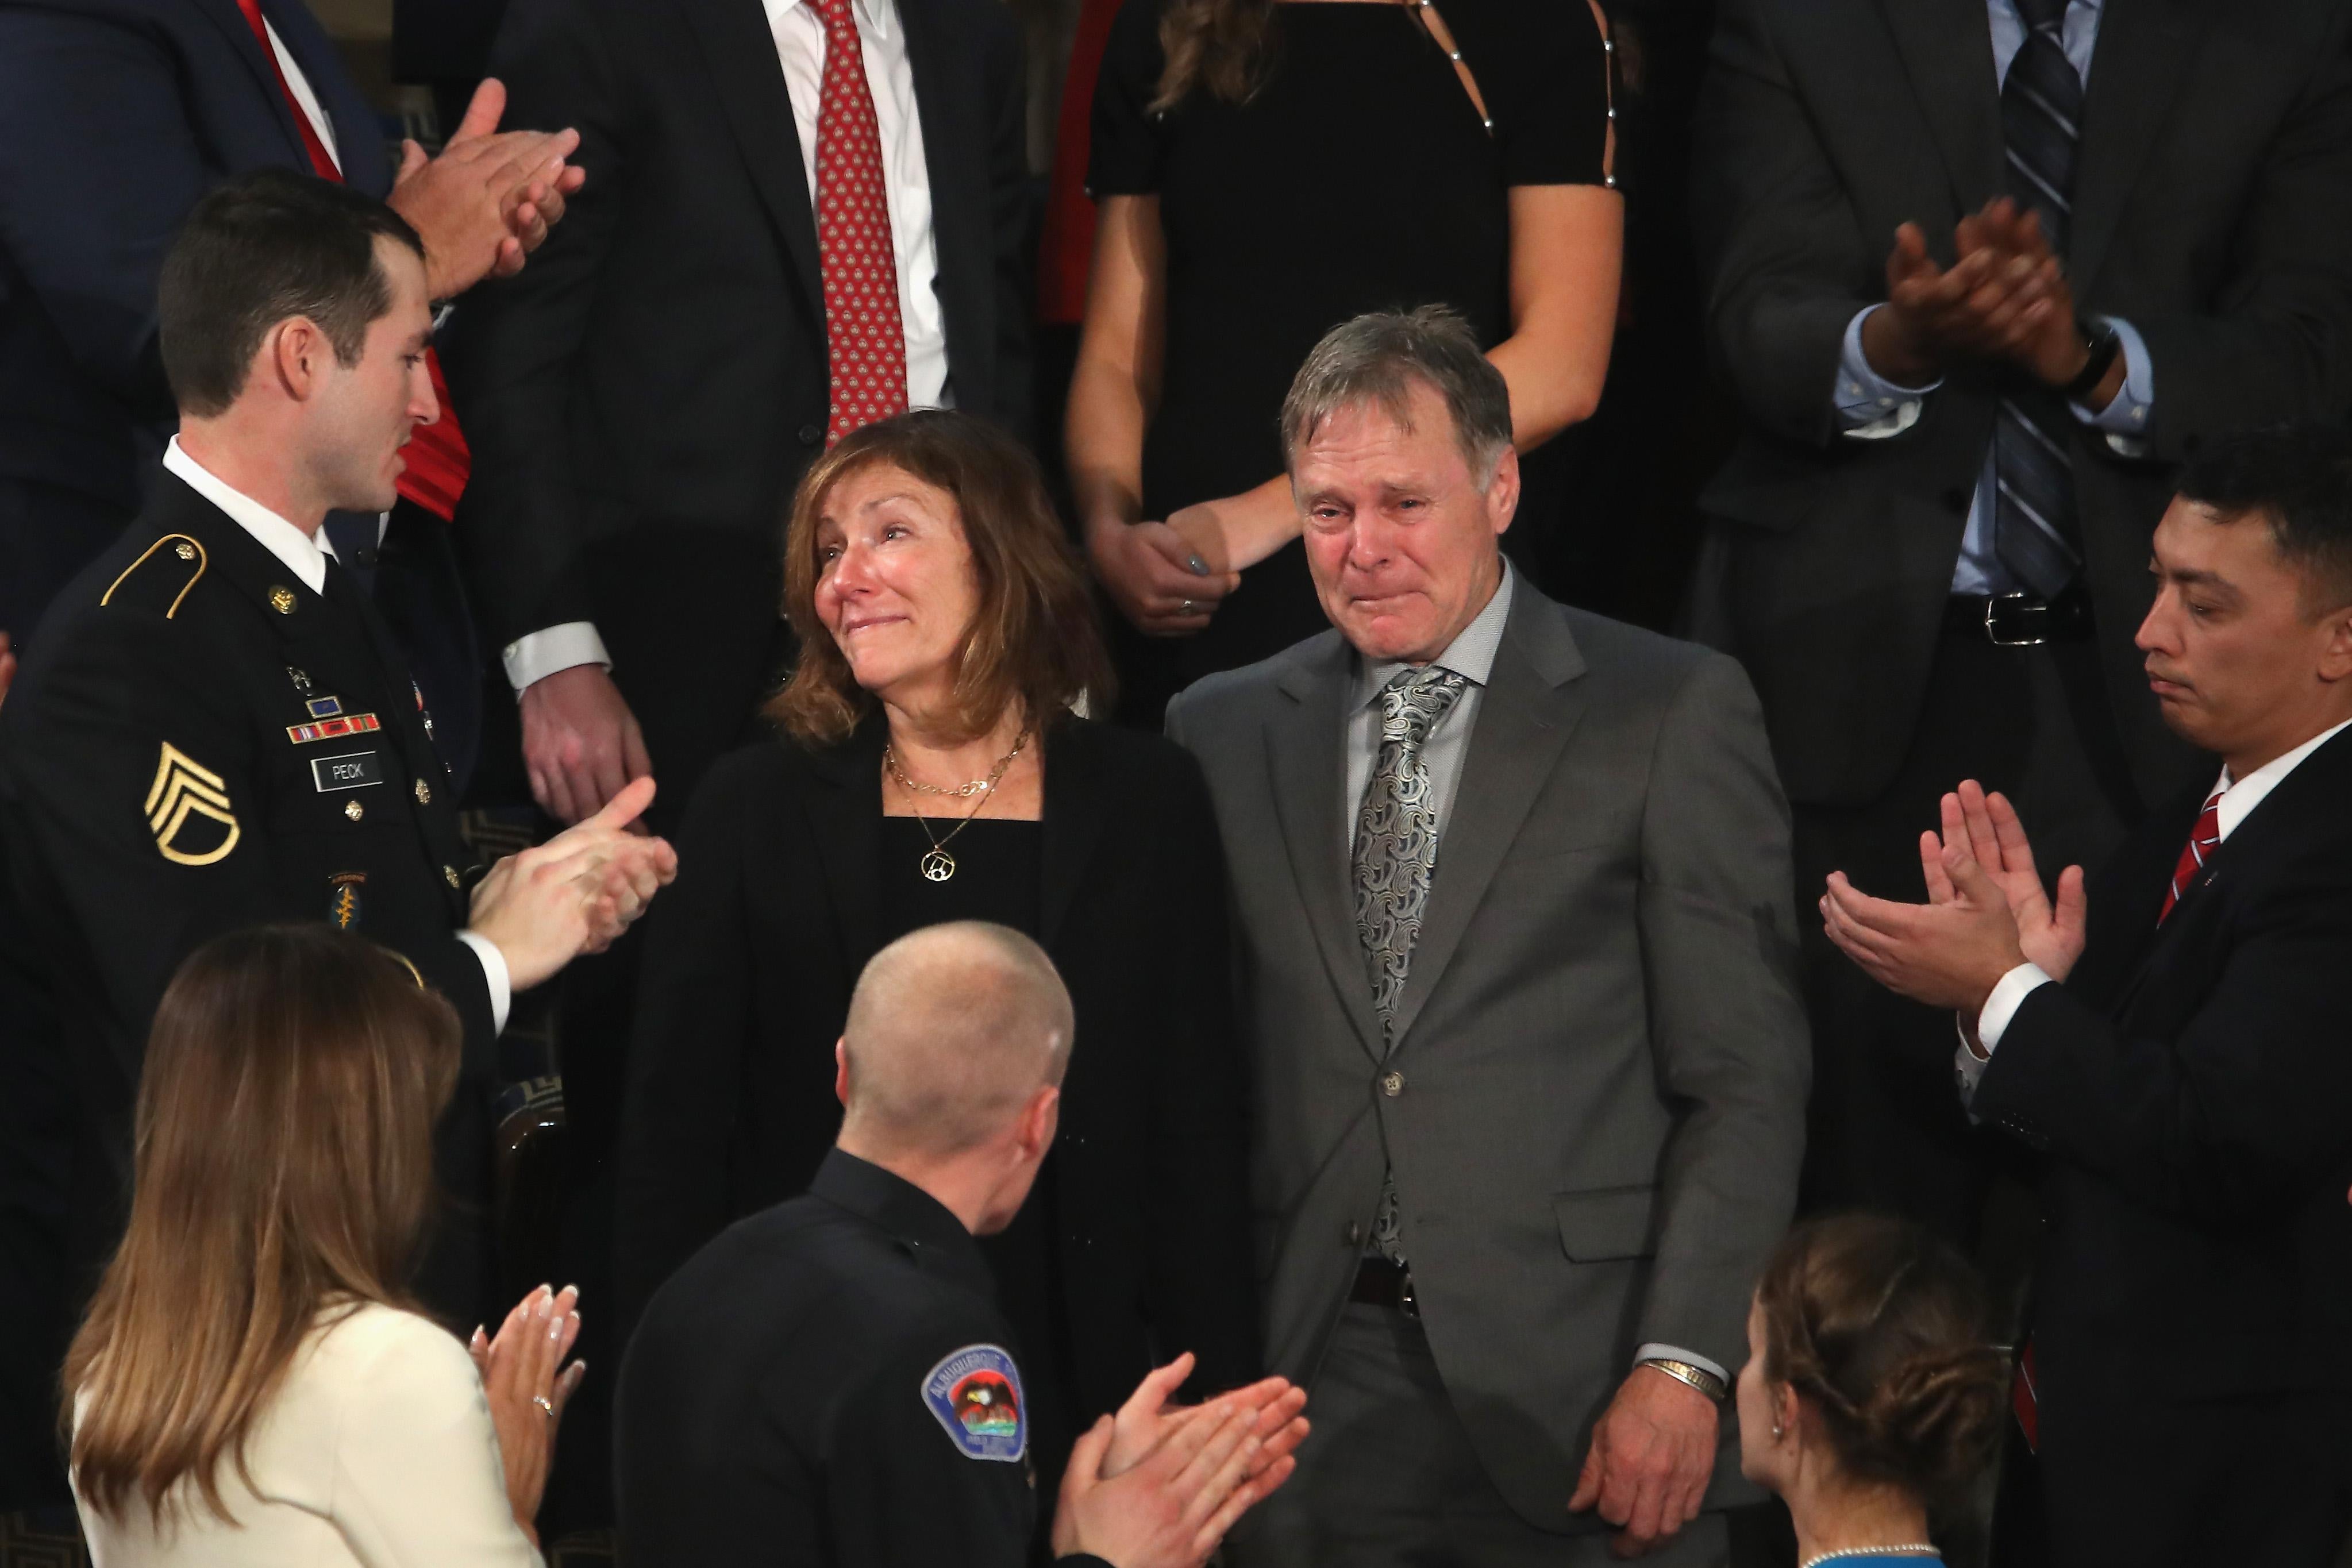 Fred and Cindy Warmbier, both weeping, stand as the surrounding crowd at the State of the Union address applauds.